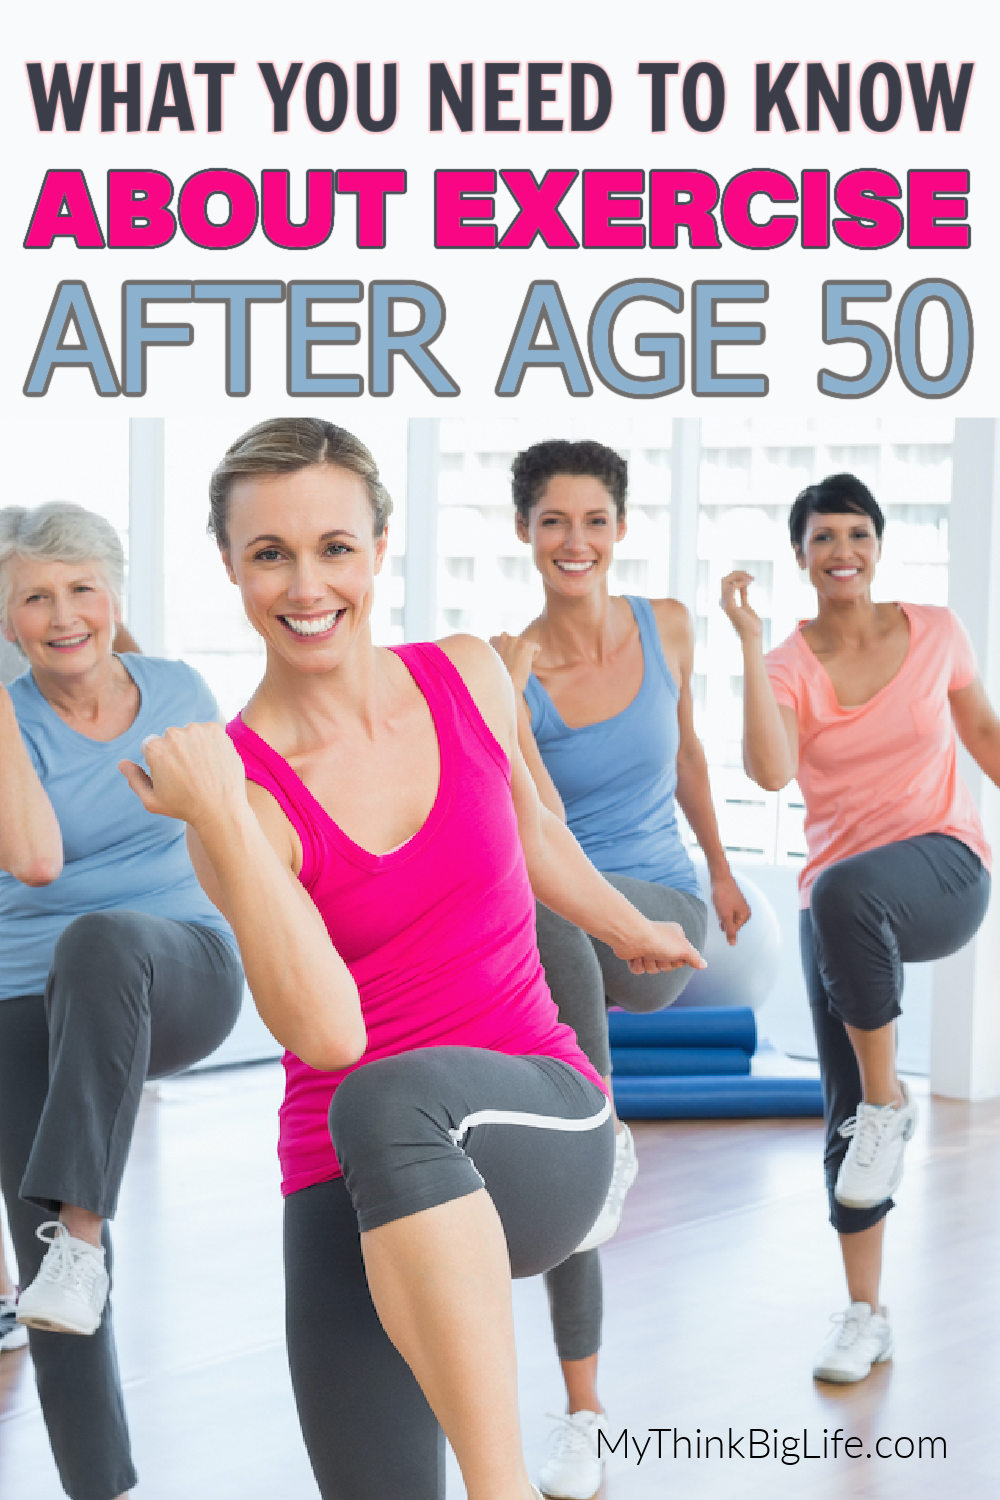 Graphic for pinterest. Picture of women exercising. Words: What you need to know about exercising after age 50